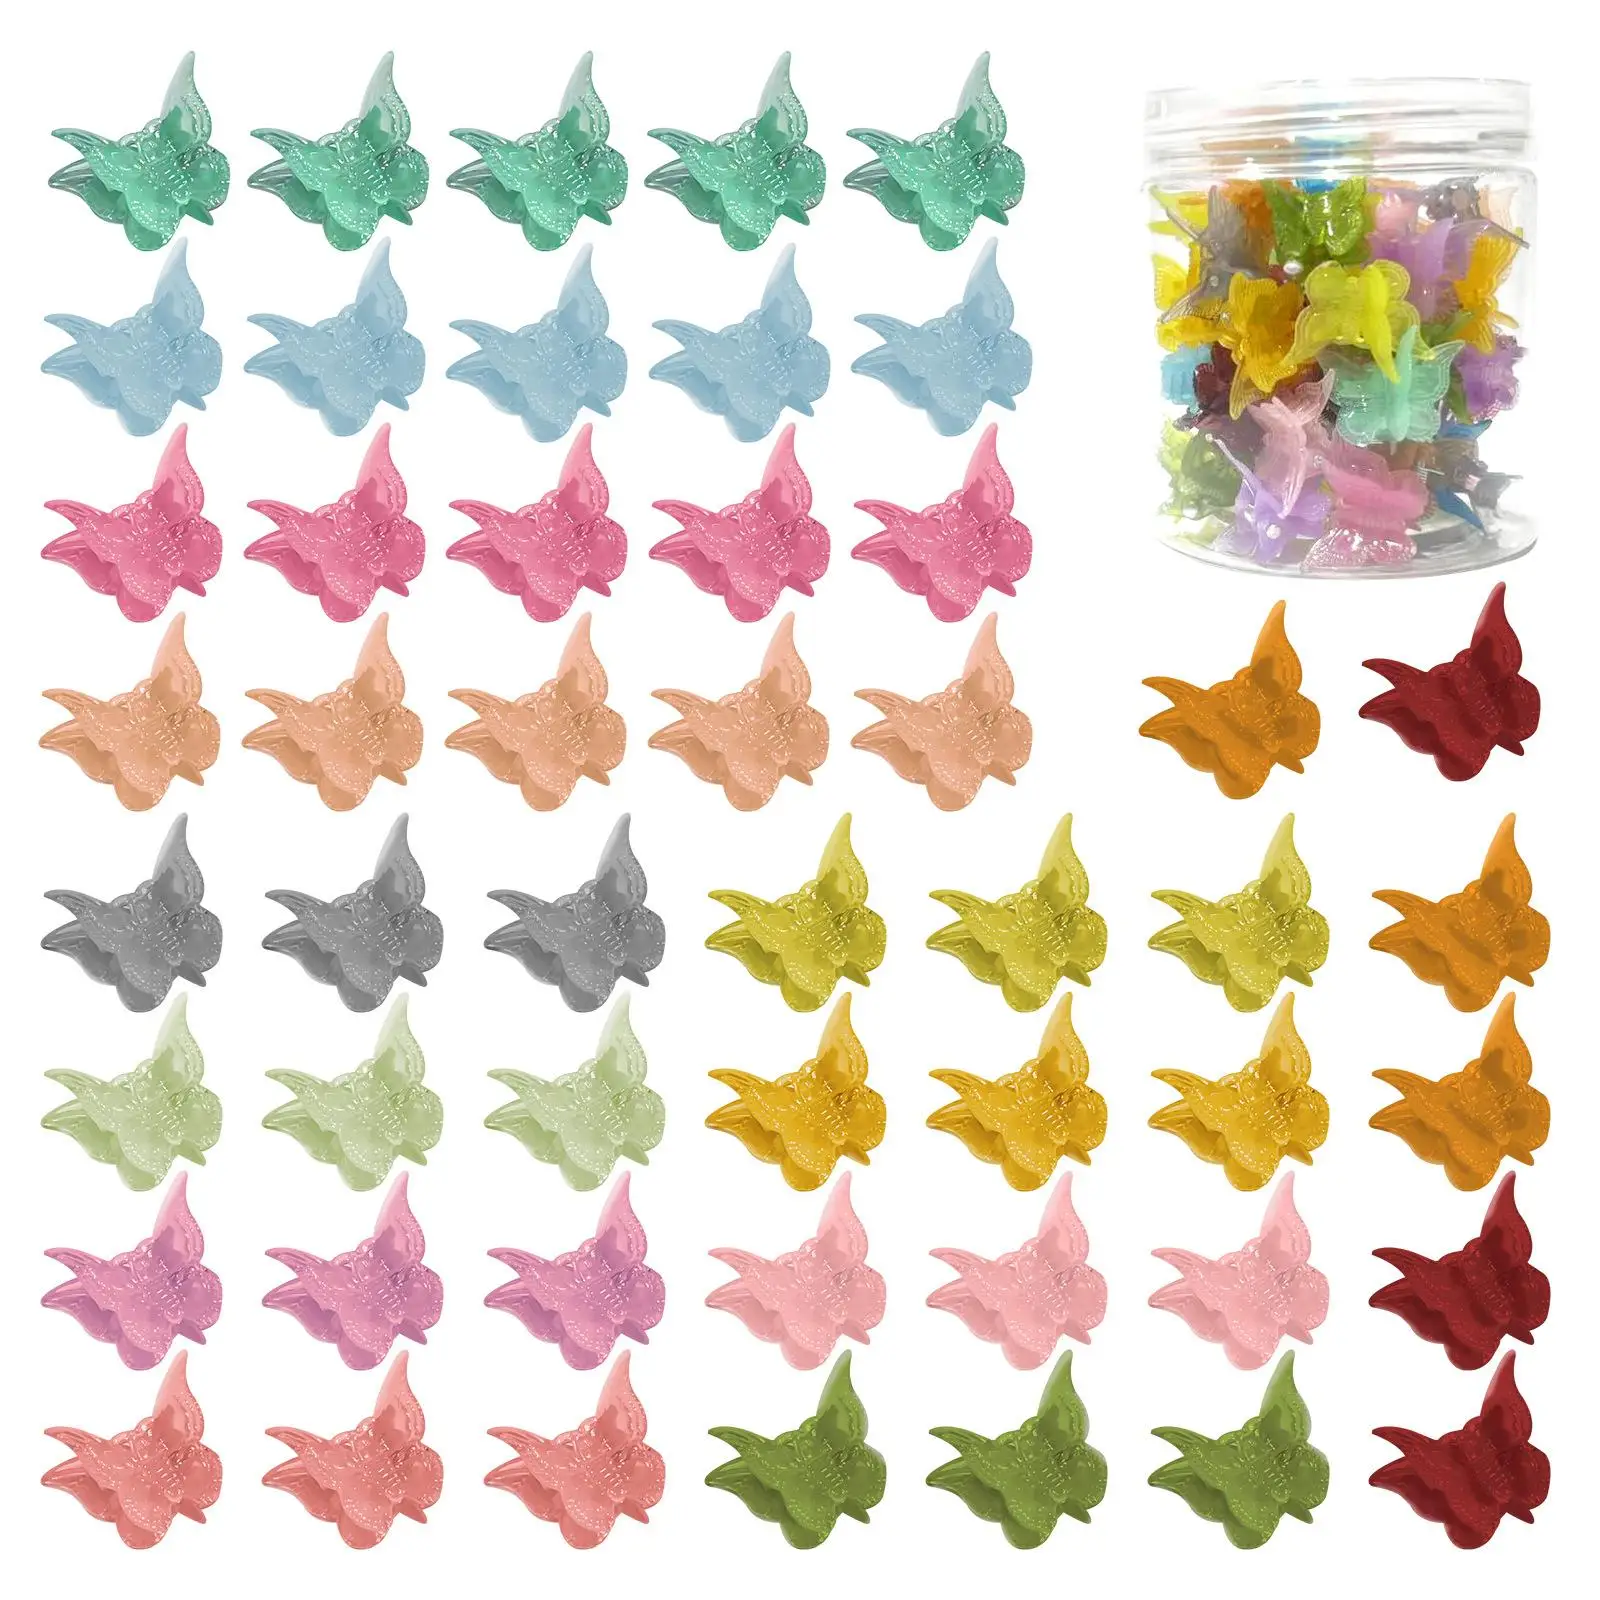 50Pcs Butterfly Hair Clips with Box Package Beautiful Hair Accessories Mini Cute Hair Claws Clips for School Party Children Kids